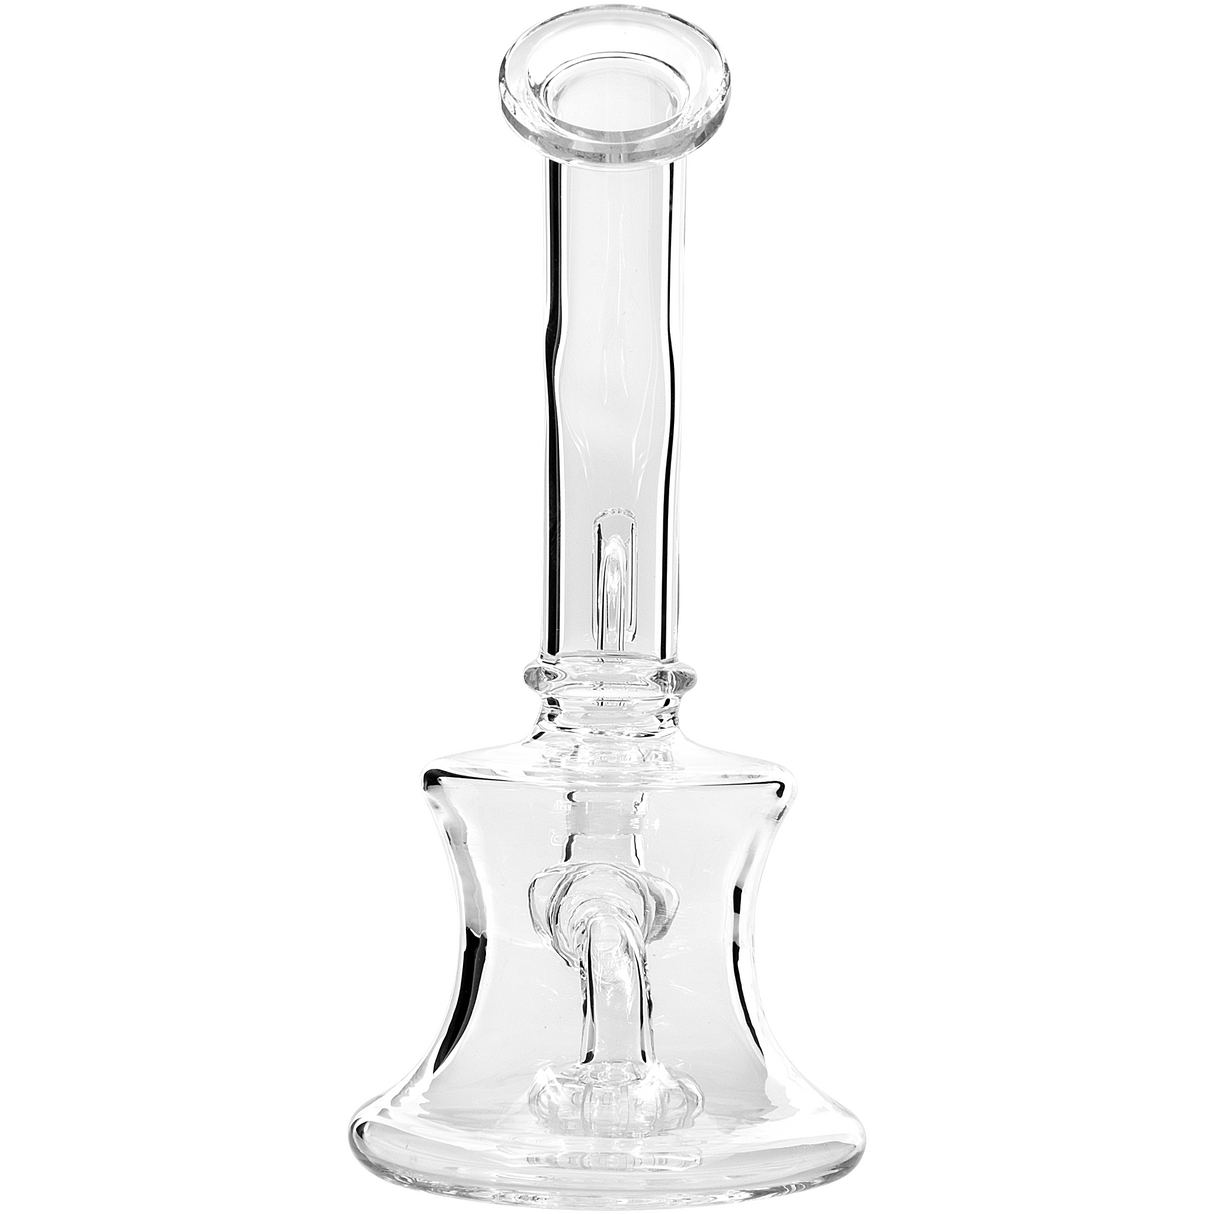 Glassic Bent Neck Travel Size Rig with Banger, Clear Borosilicate Glass, 7.5" Showerhead Percolator